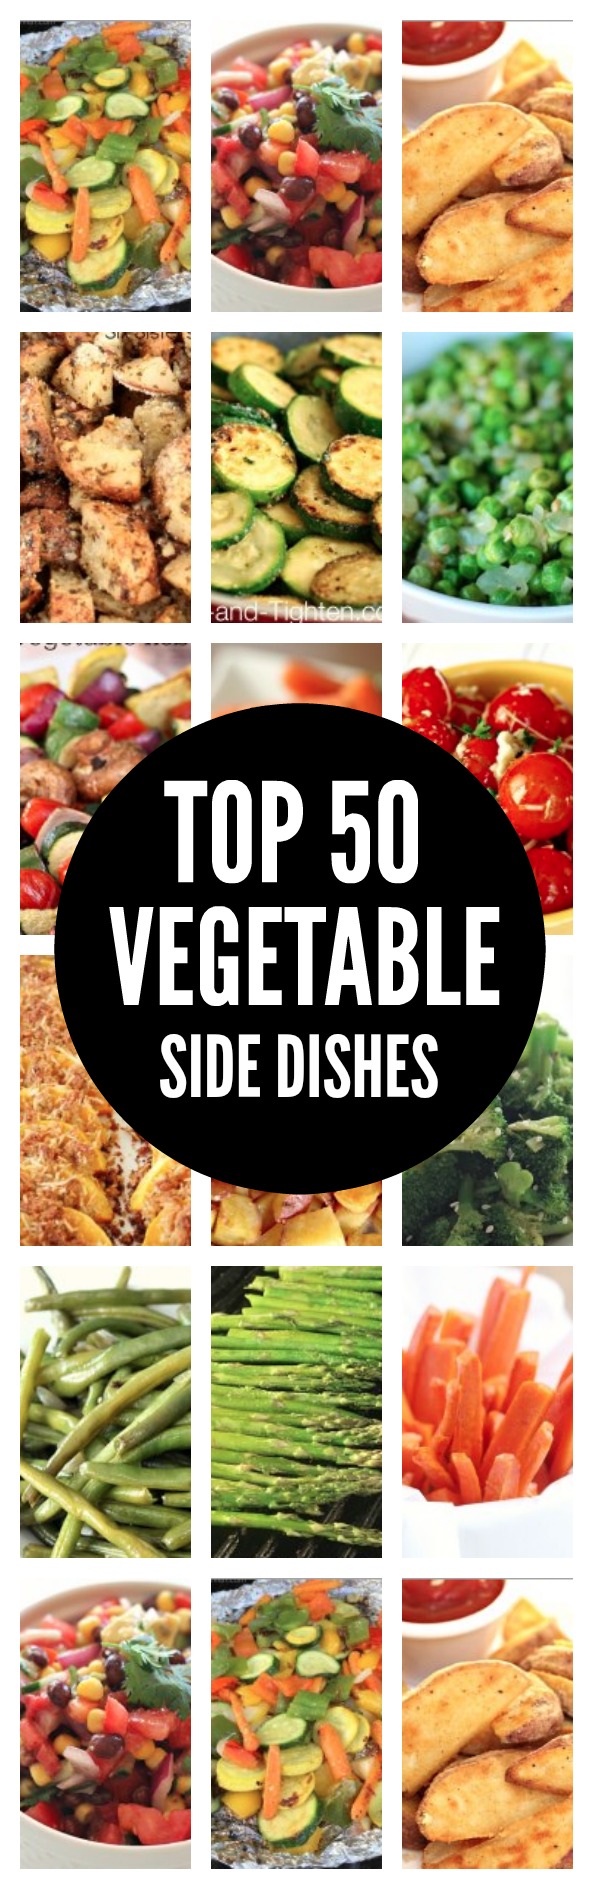 Top 50 Vegetable Side Dishes on Tone-and-Tighten